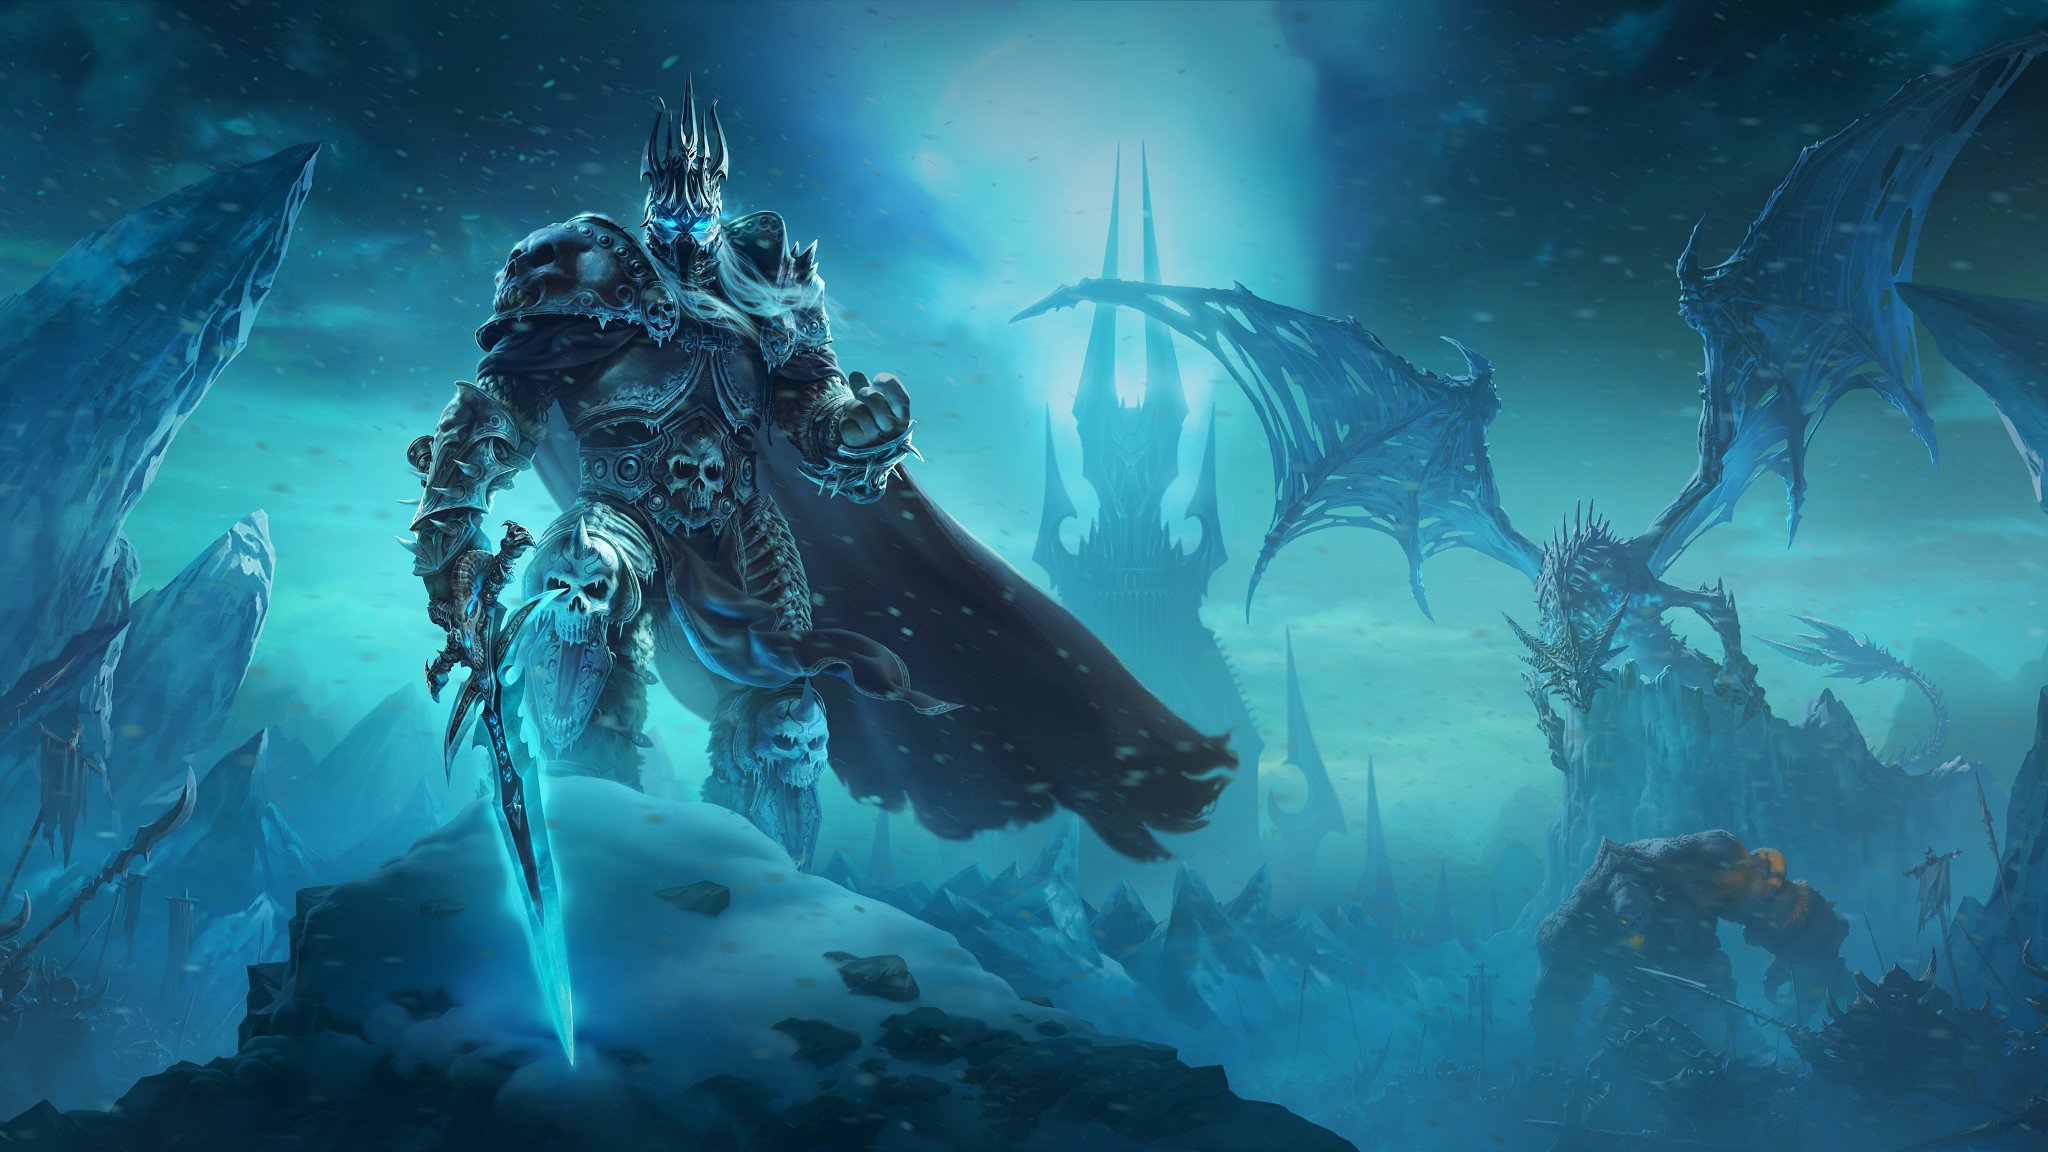 Will World of Warcraft ever come to consoles?, Gamers Rumble, gamersrumble.com